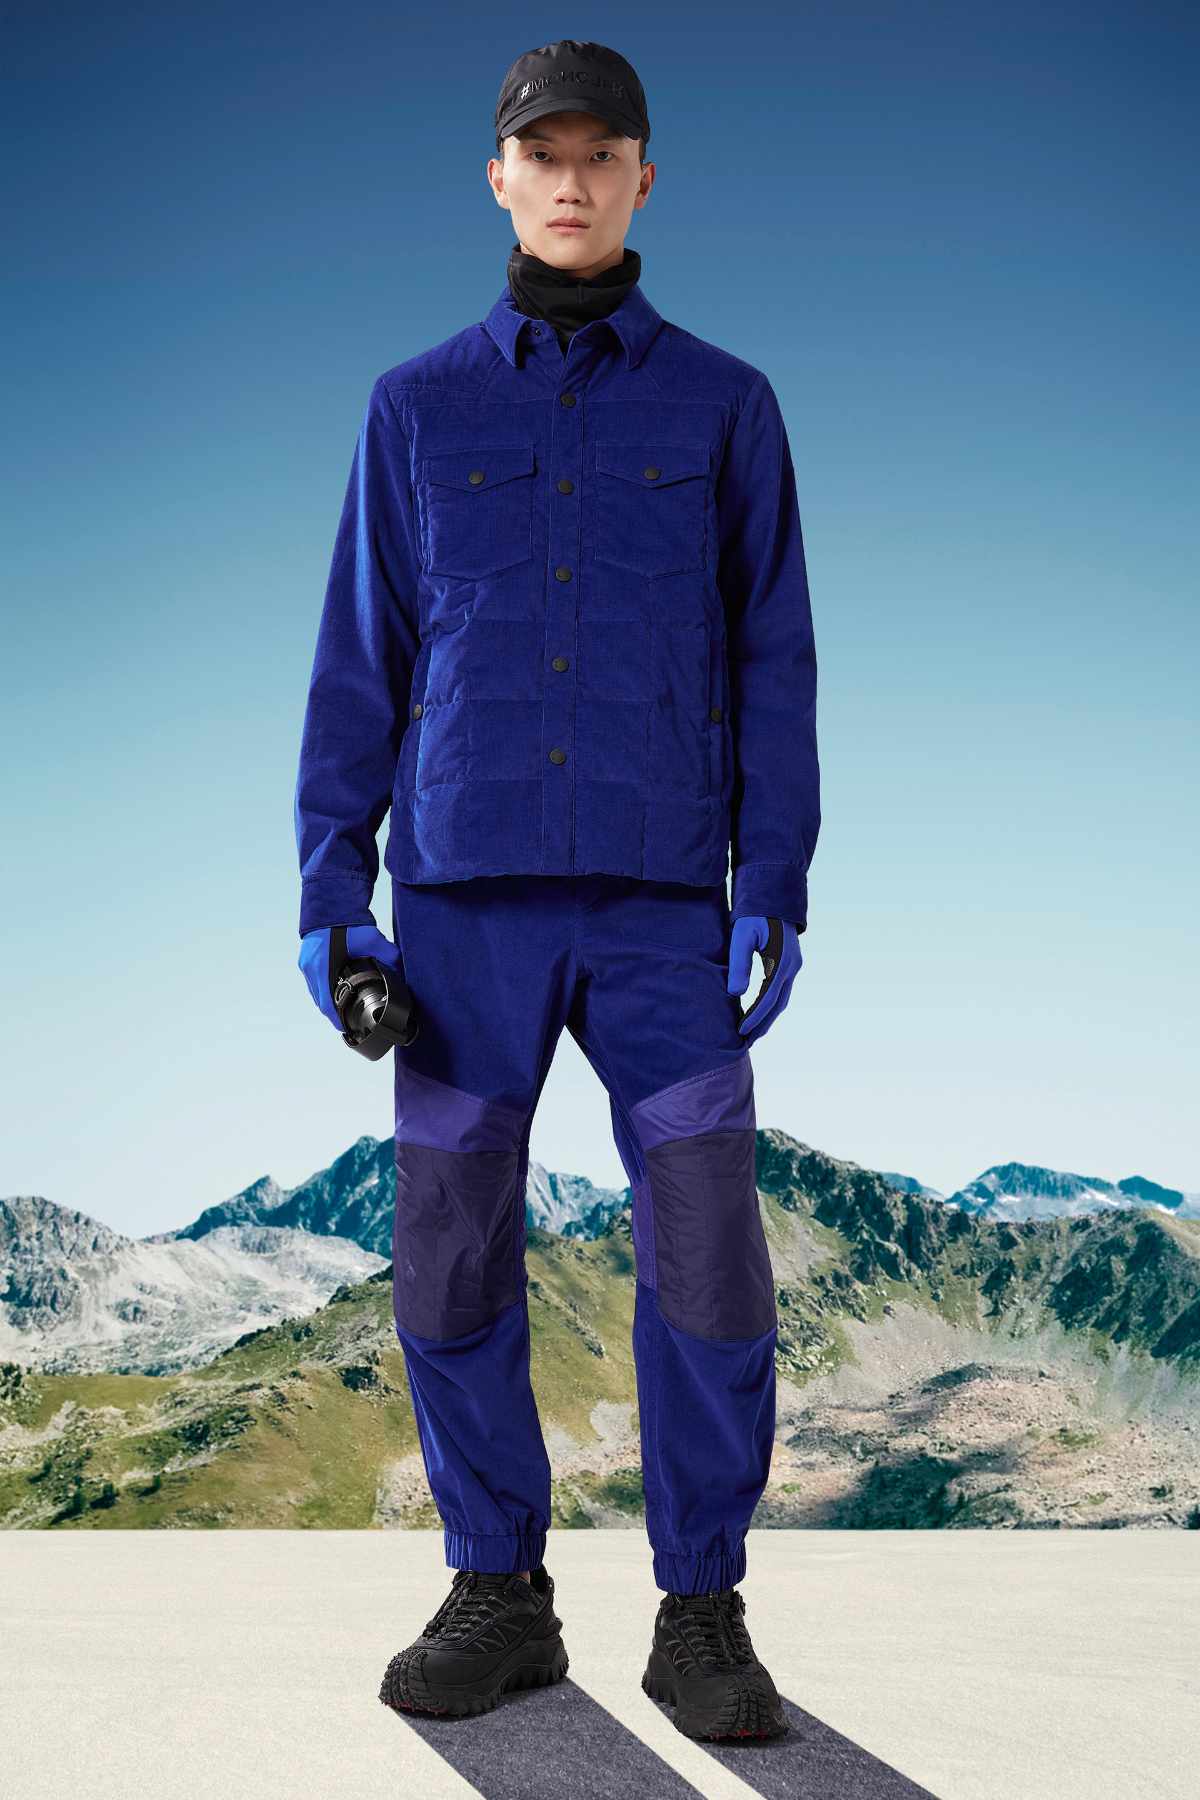 Moncler Presents Its New Grenoble Spring/Summer 2023 Collection